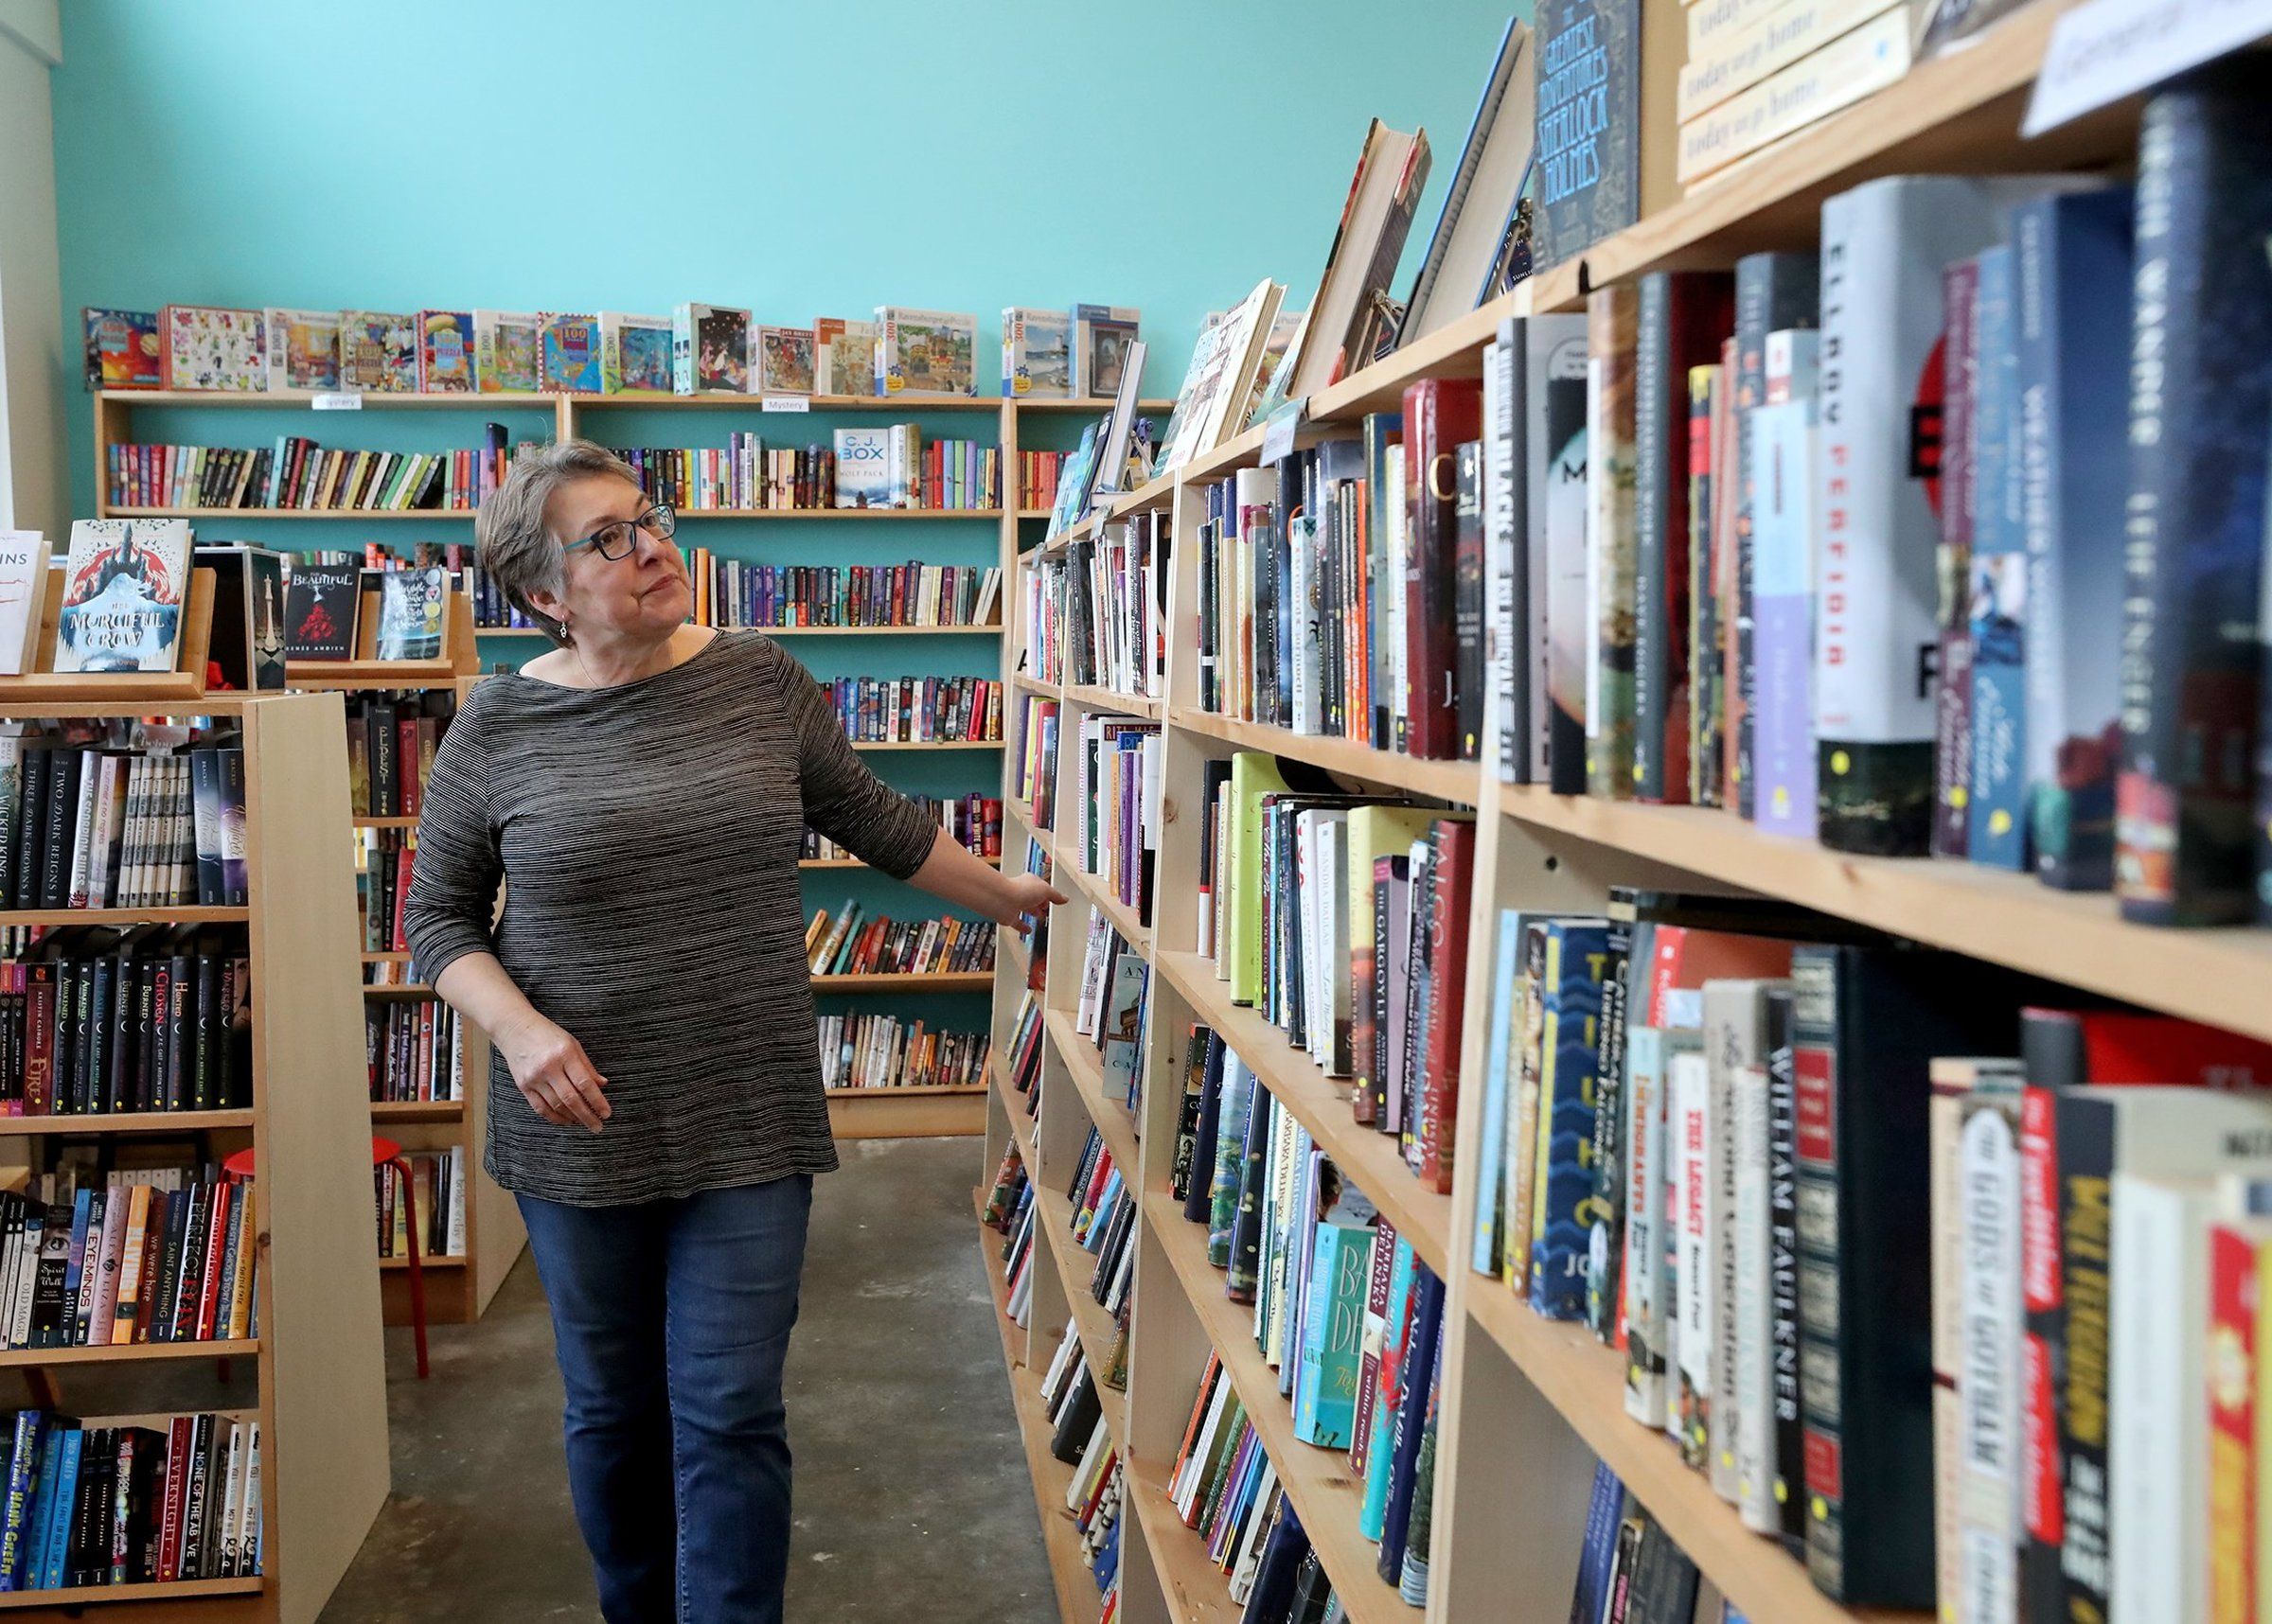 After moving 'about 20 feet,' Burien's Page 2 Books is